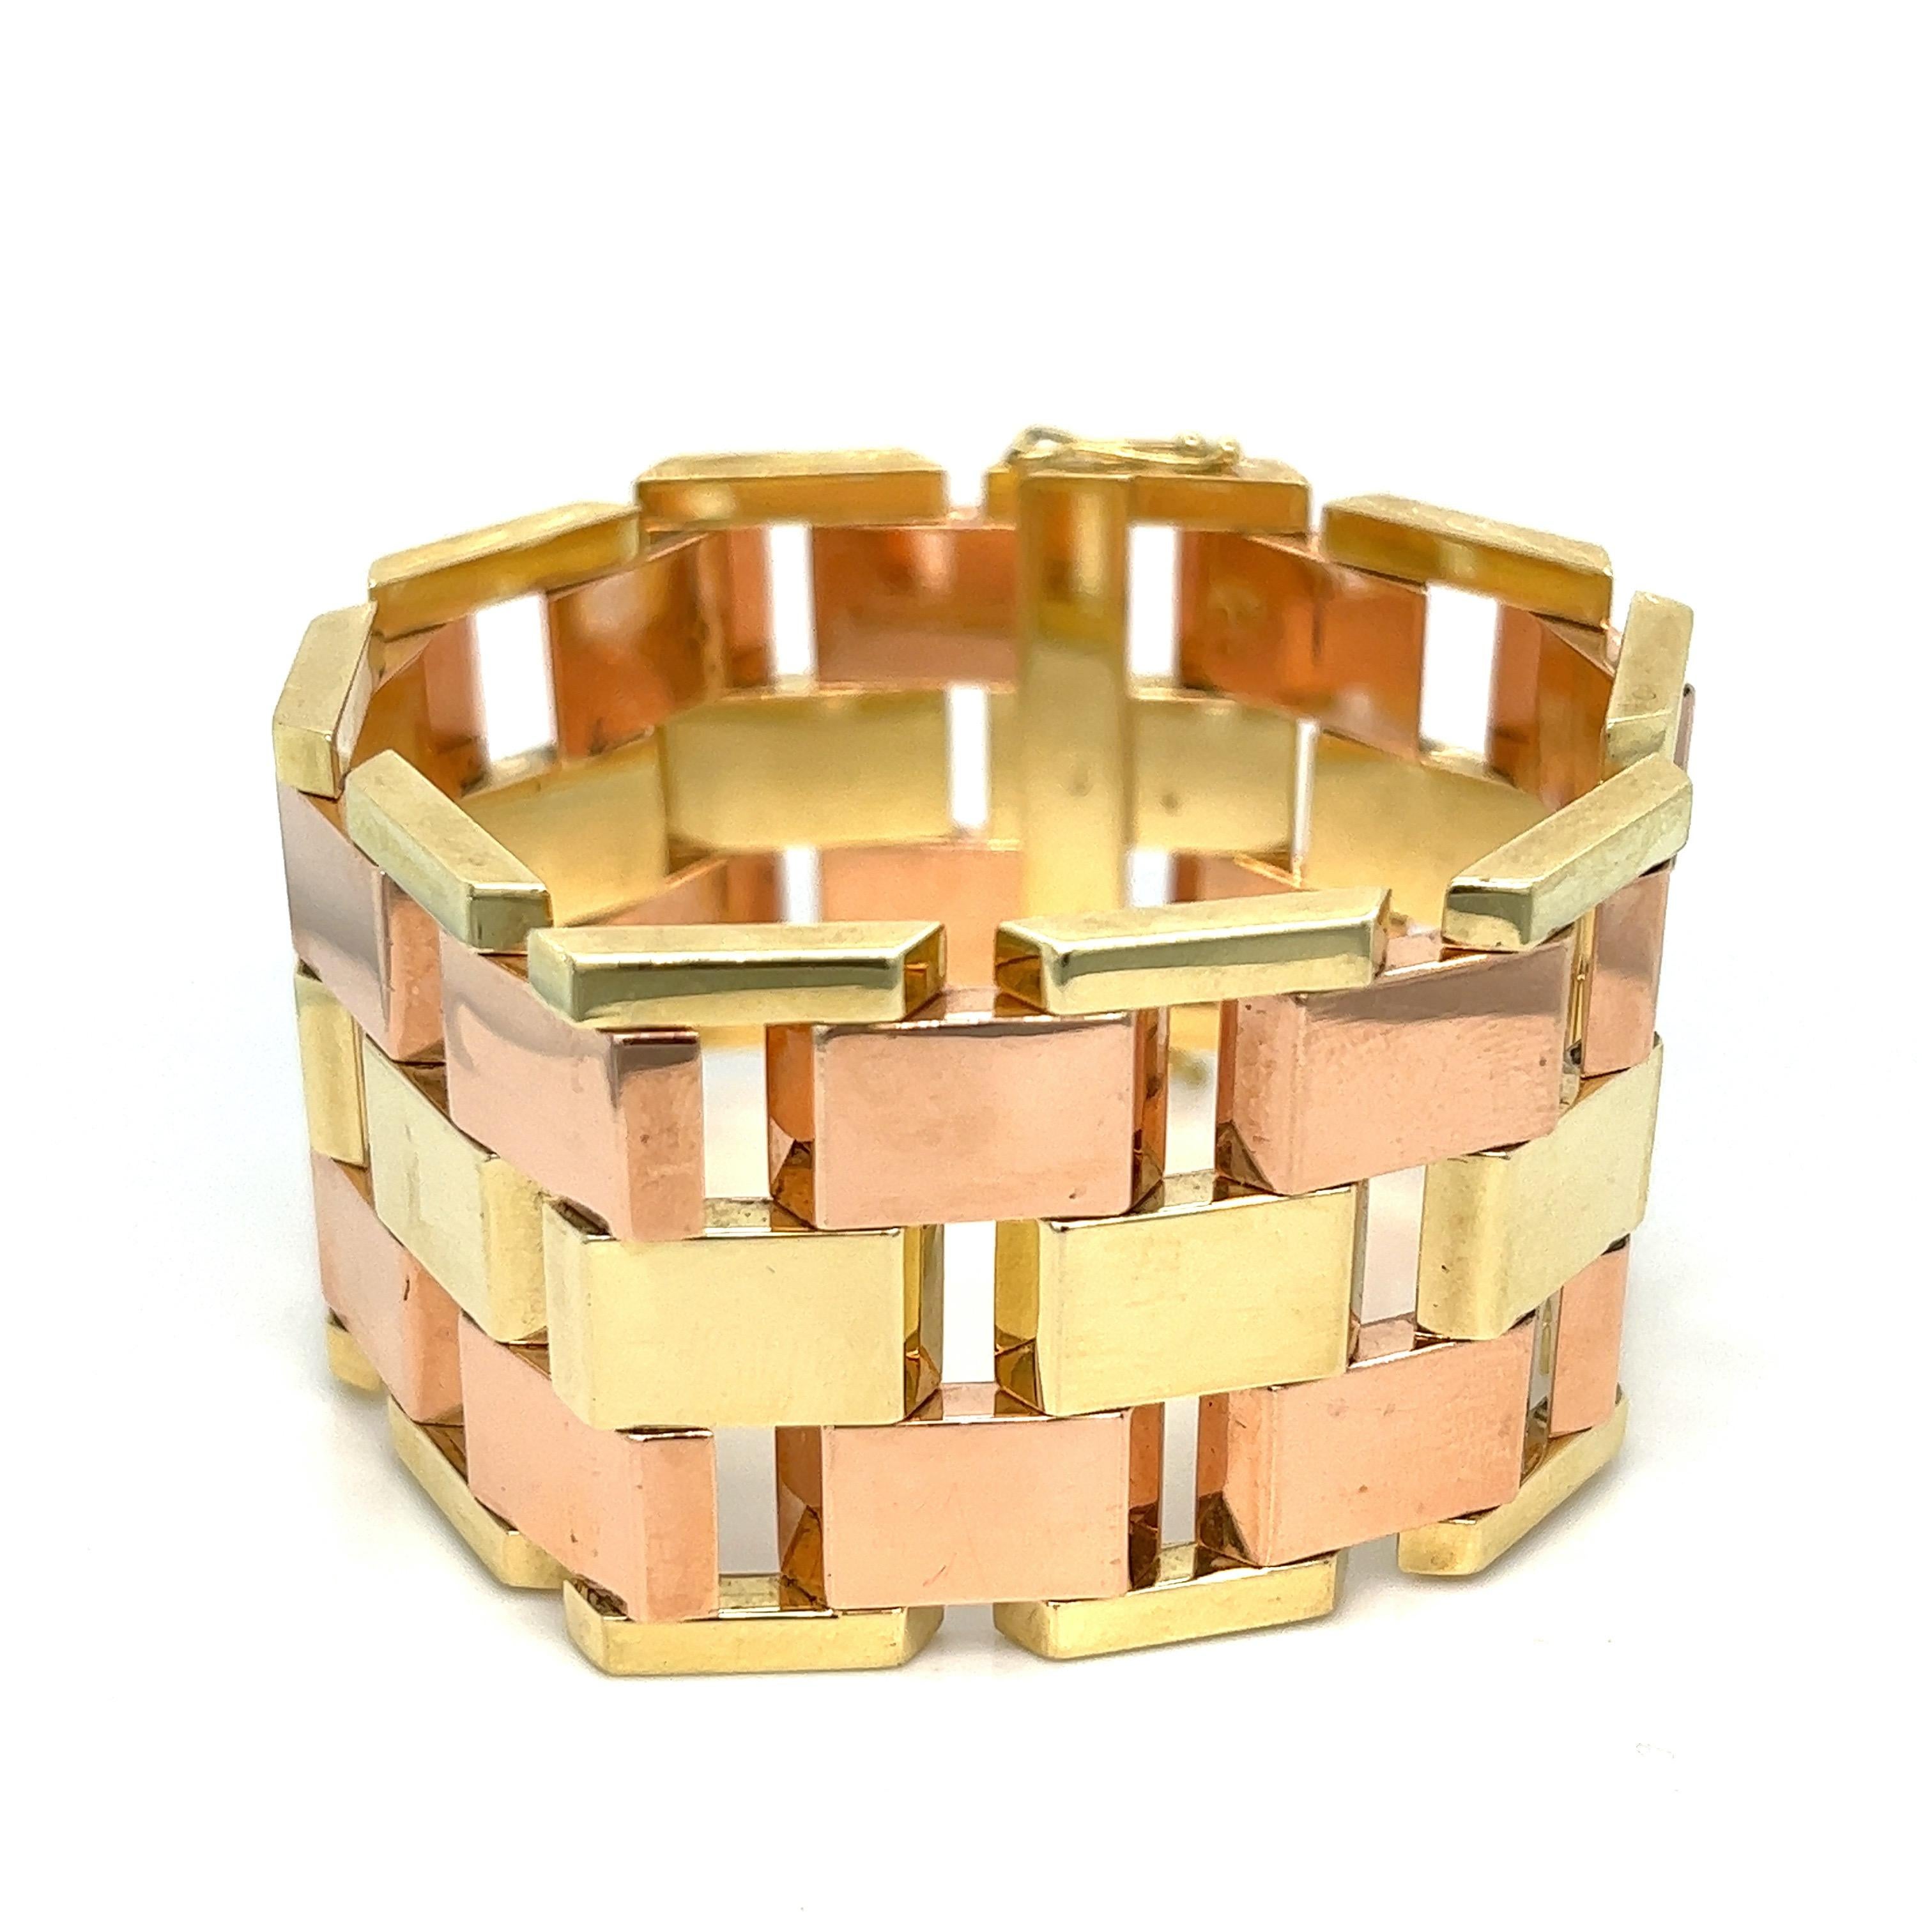 Retro two-color gold bracelets, Austria

Wide strap bracelet of geometric links, can be combined to form a necklace, 14 karat yellow gold; Austrian hallmarks 

Size: width 0.31 inch, length 8 inches each
Total weight: 111.4 grams